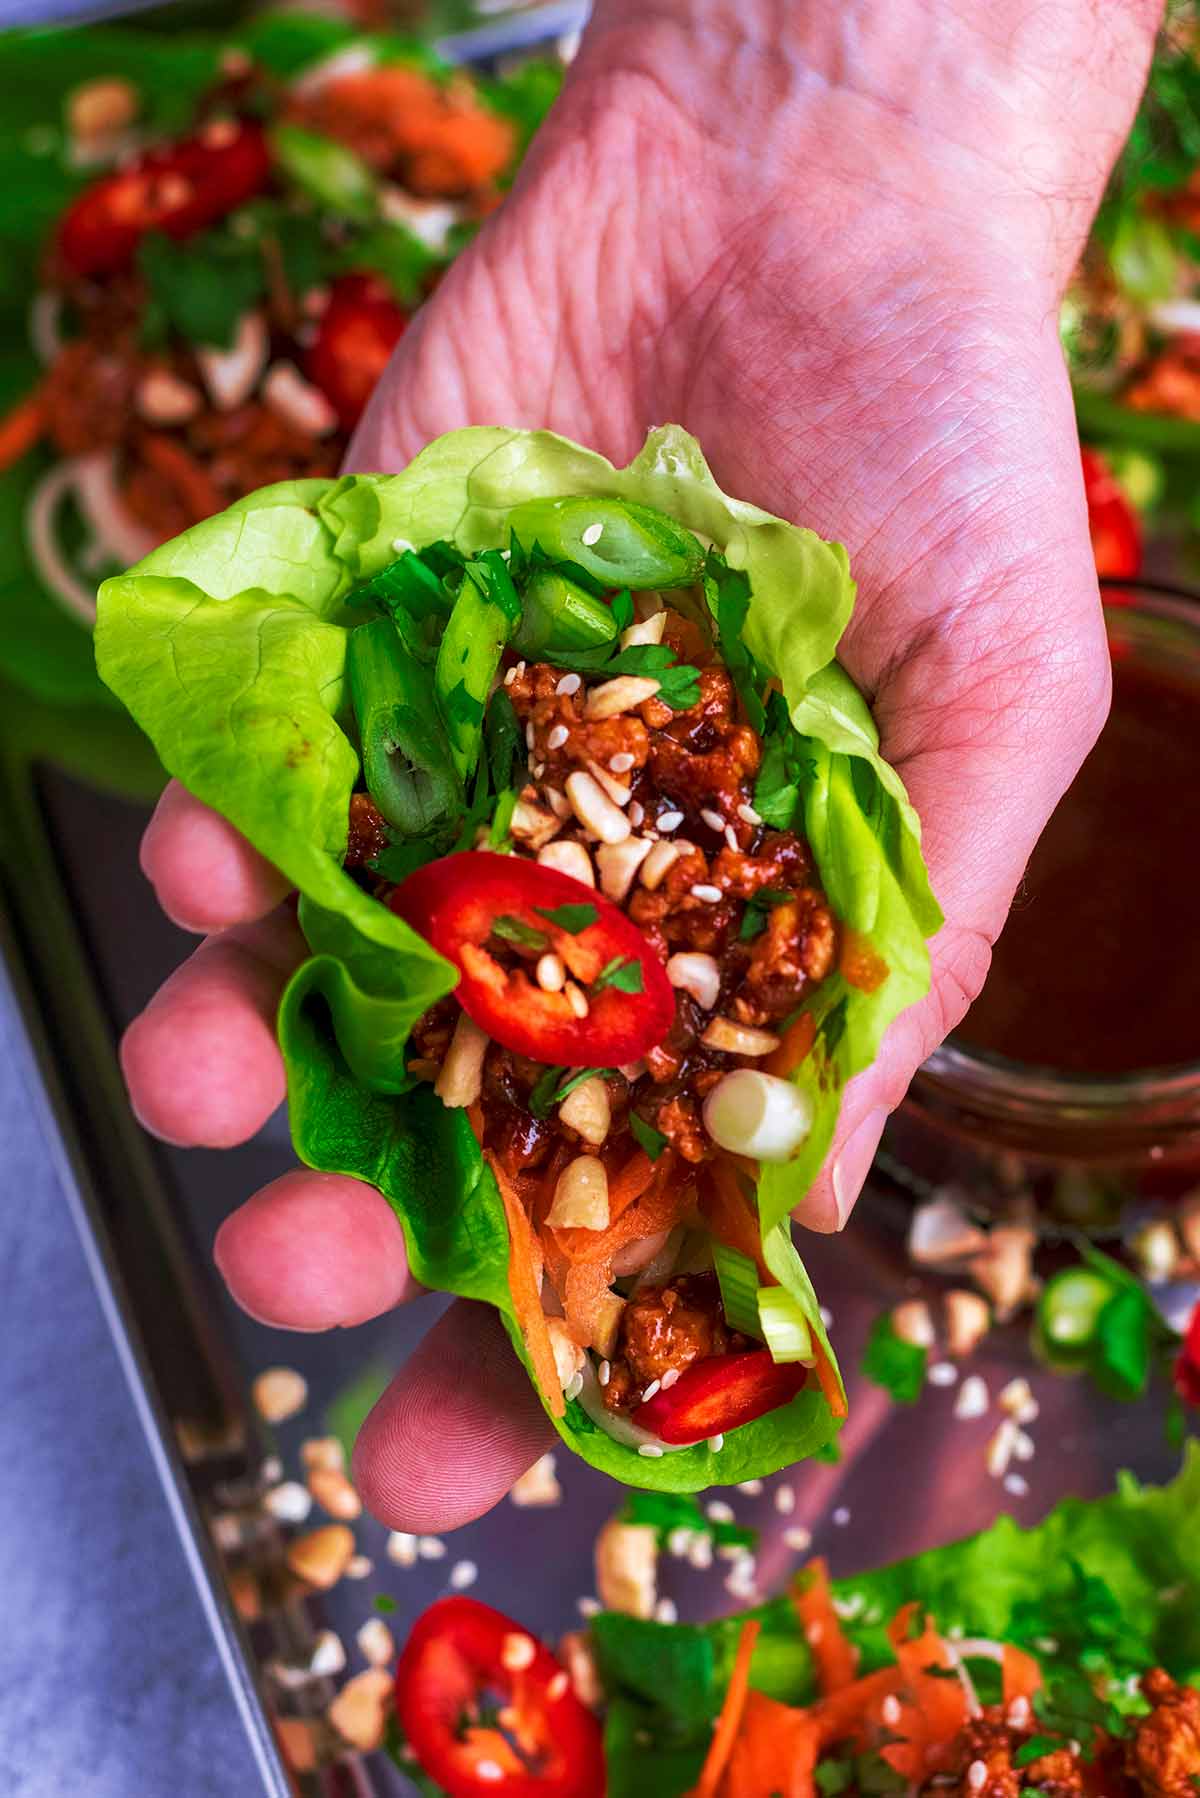 A hand holding a lettuce wrap.